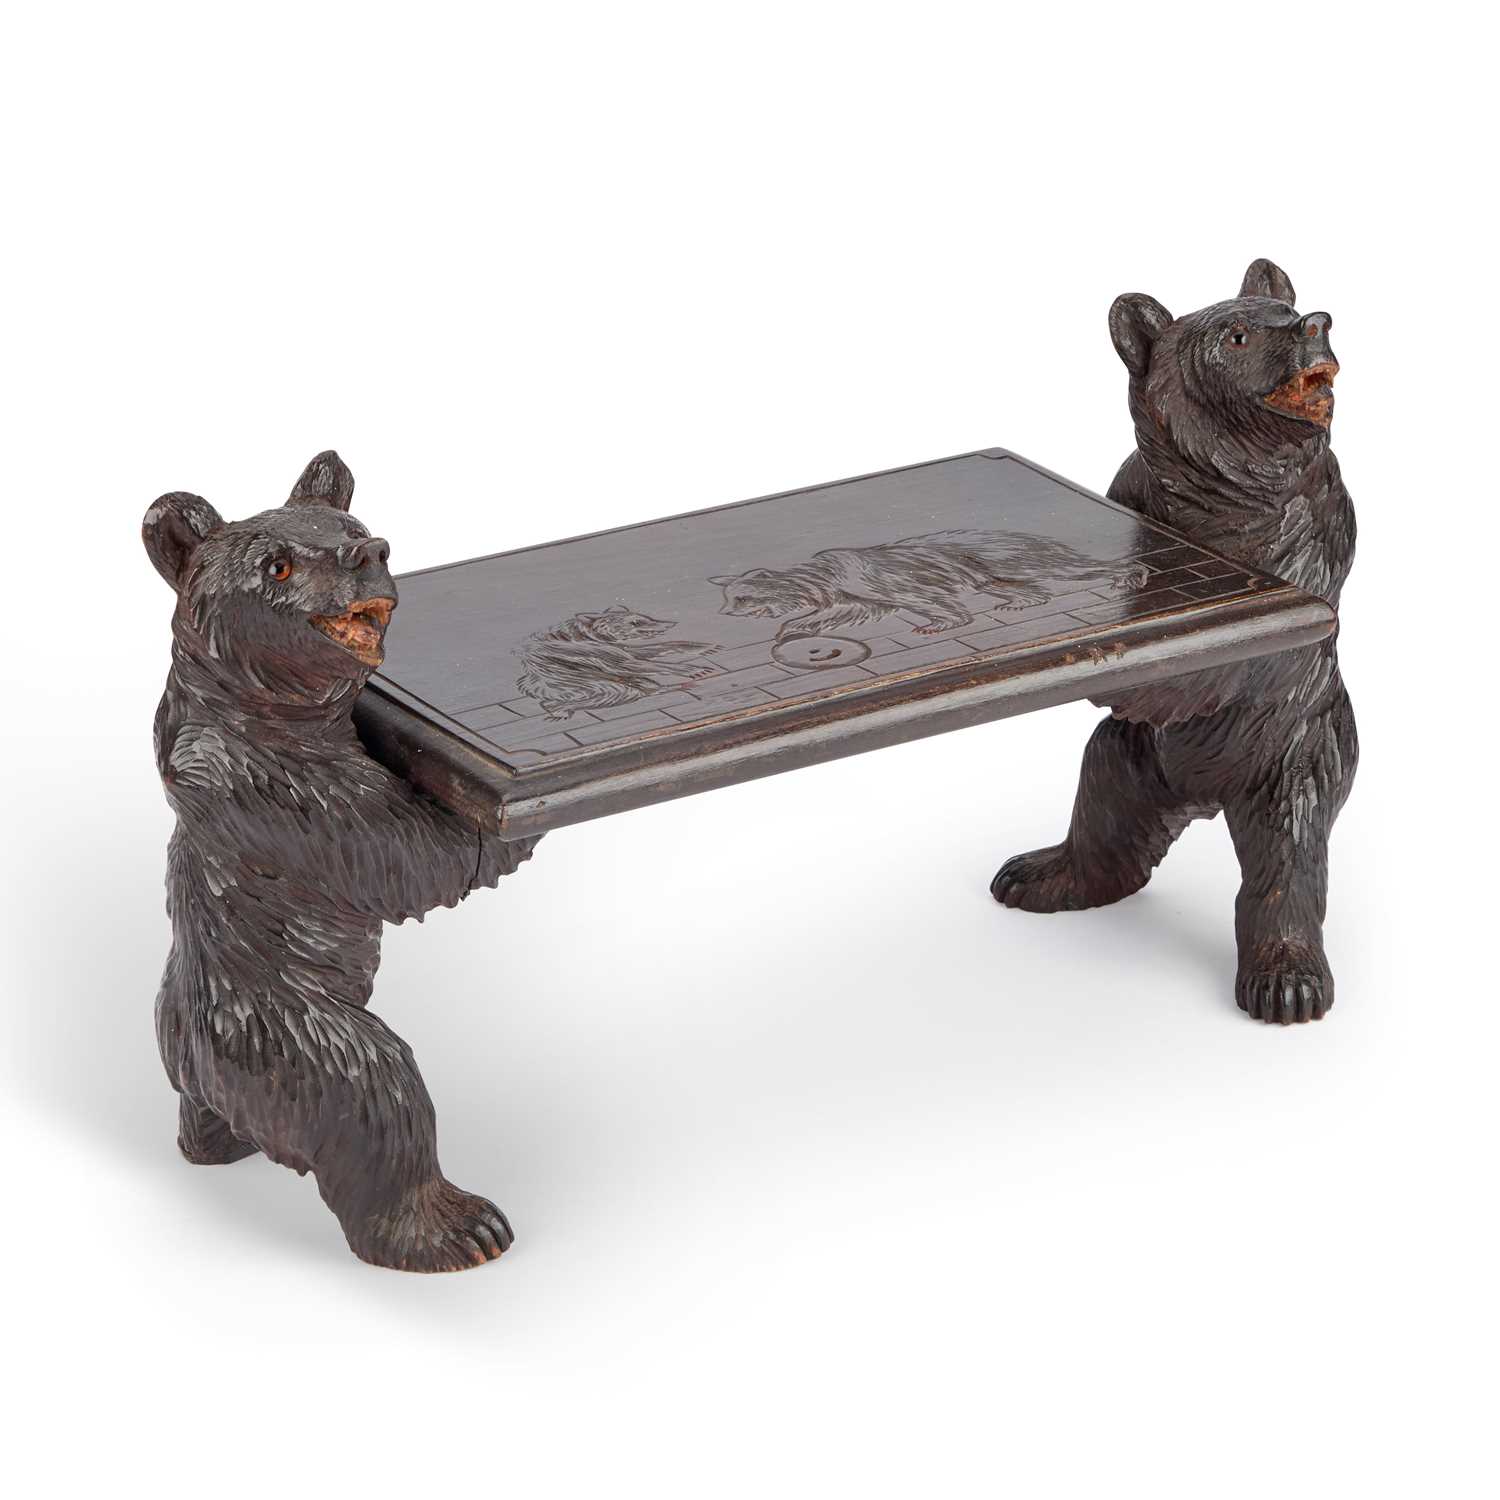 A BLACK FOREST MINIATURE 'BEAR' BENCH OR TABLE, LATE 19TH CENTURY